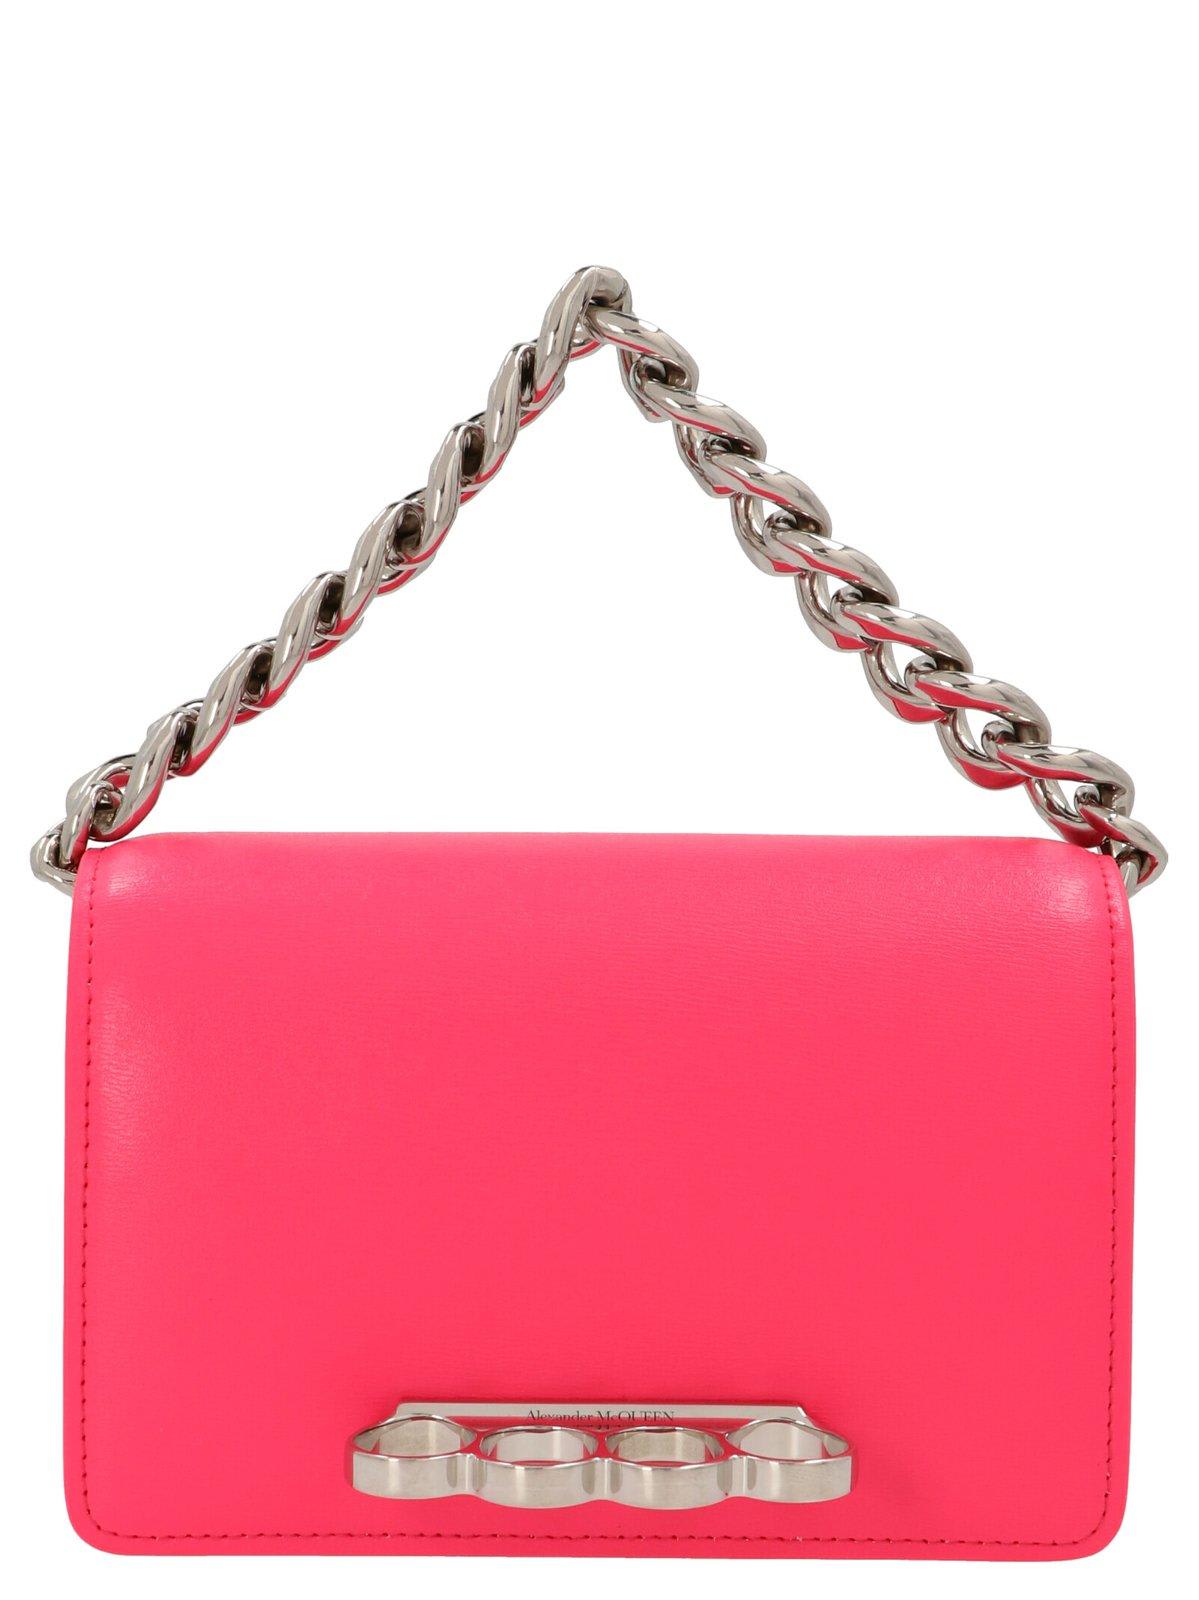 Alexander McQueen The Four Ring Chained Shoulder Bag